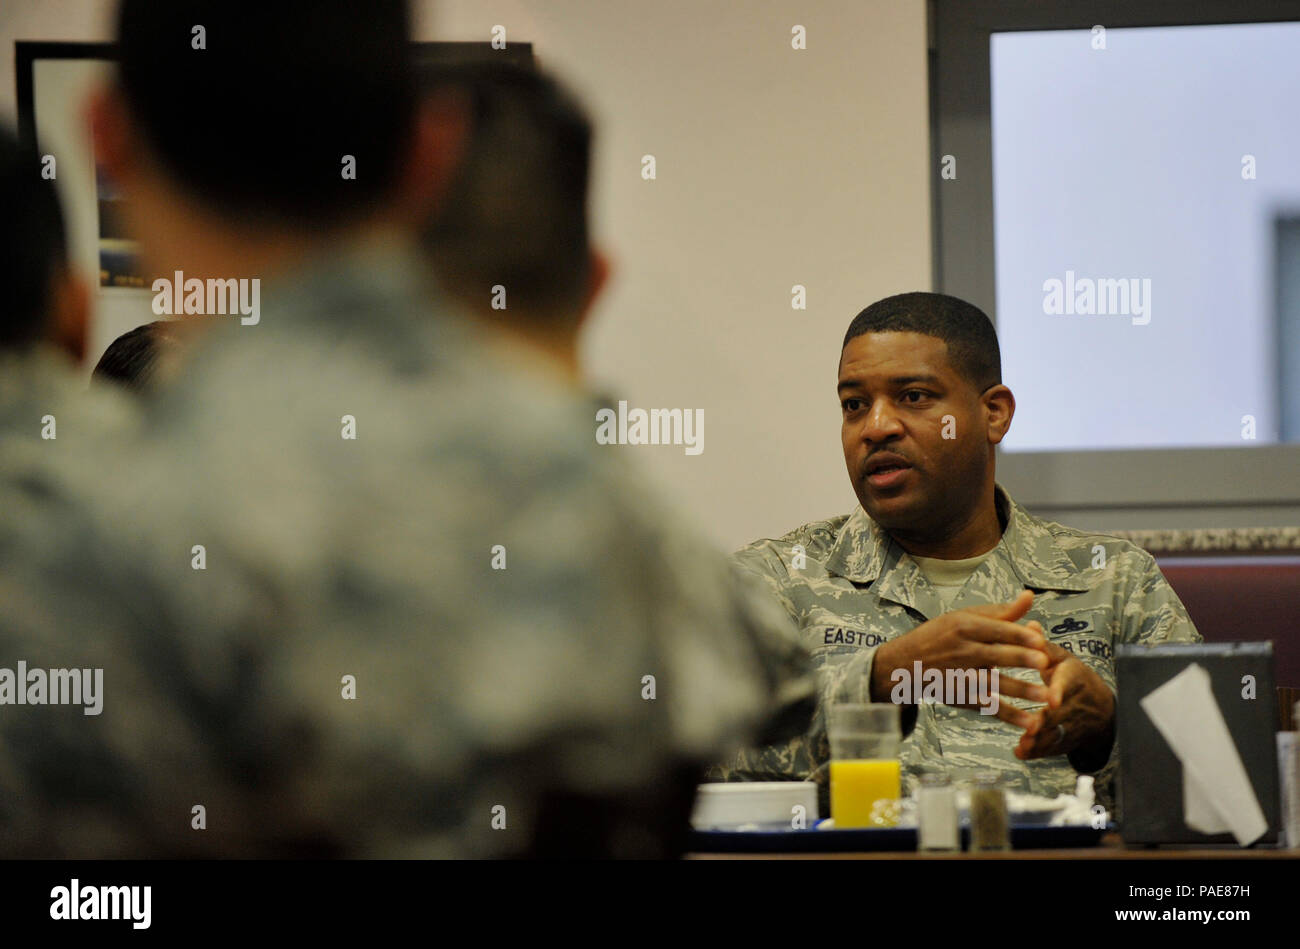 Chief Master Sgt. Phillip L. Easton (right), 86th Airlift Wing command chief, answers an Airman’s question during an enlisted breakfast  March 11, 2016, at Kapaun Air Station, Germany. Easton talked to the Airmen about his priorities and offered his experiences for becoming better Airmen. (U.S. Air Force photo/Airman 1st Class Larissa Greatwood) Stock Photo